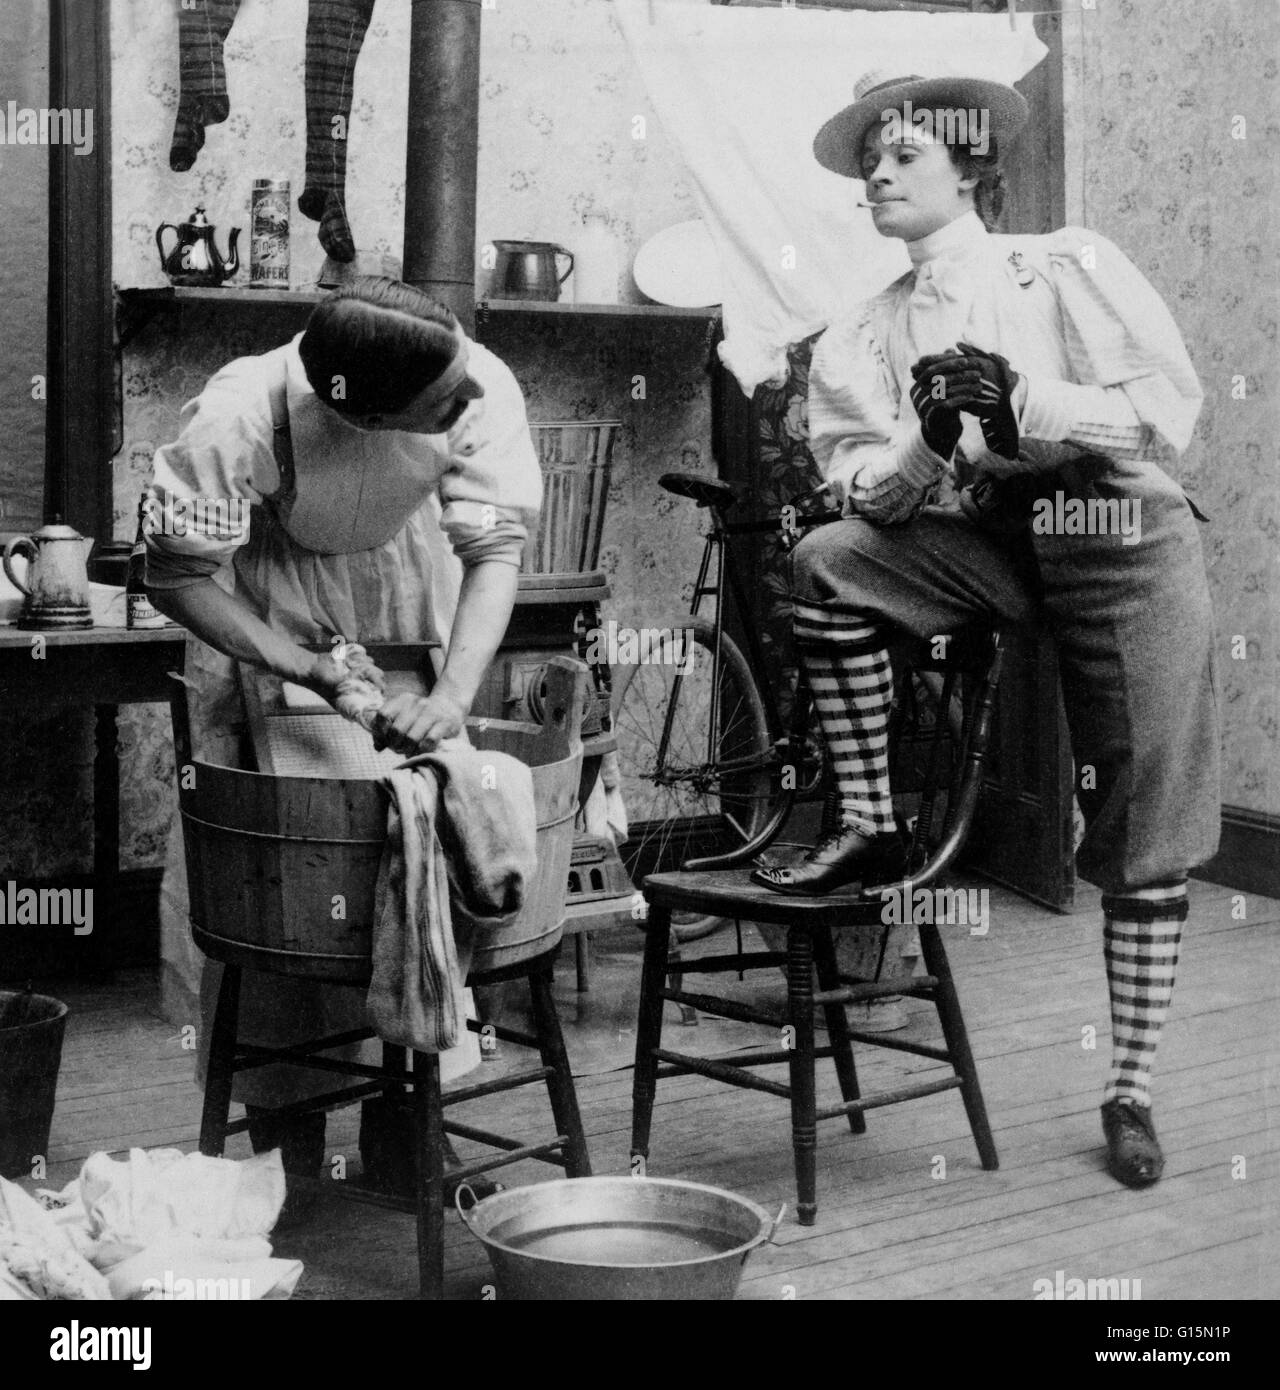 Woman in bloomers smoking cigarette and looking at man doing laundry, 1901. Bloomers is a word which has been applied to several types of divided women's garments for the lower body at various times. The costume was called the American Dress or Reform Cos Stock Photo